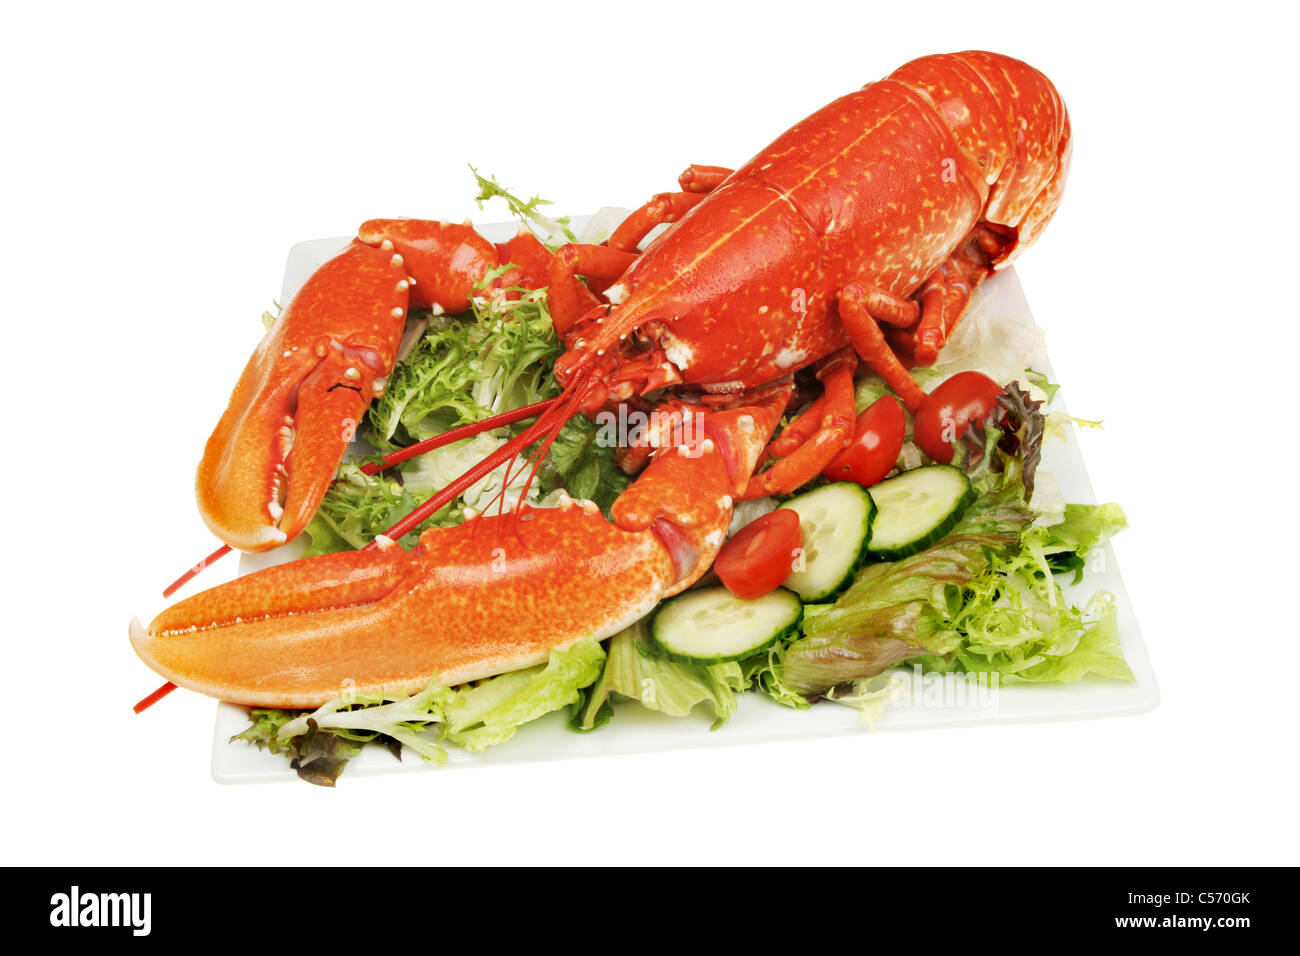 Whole cooked lobster on a bed of green salad Stock Photo